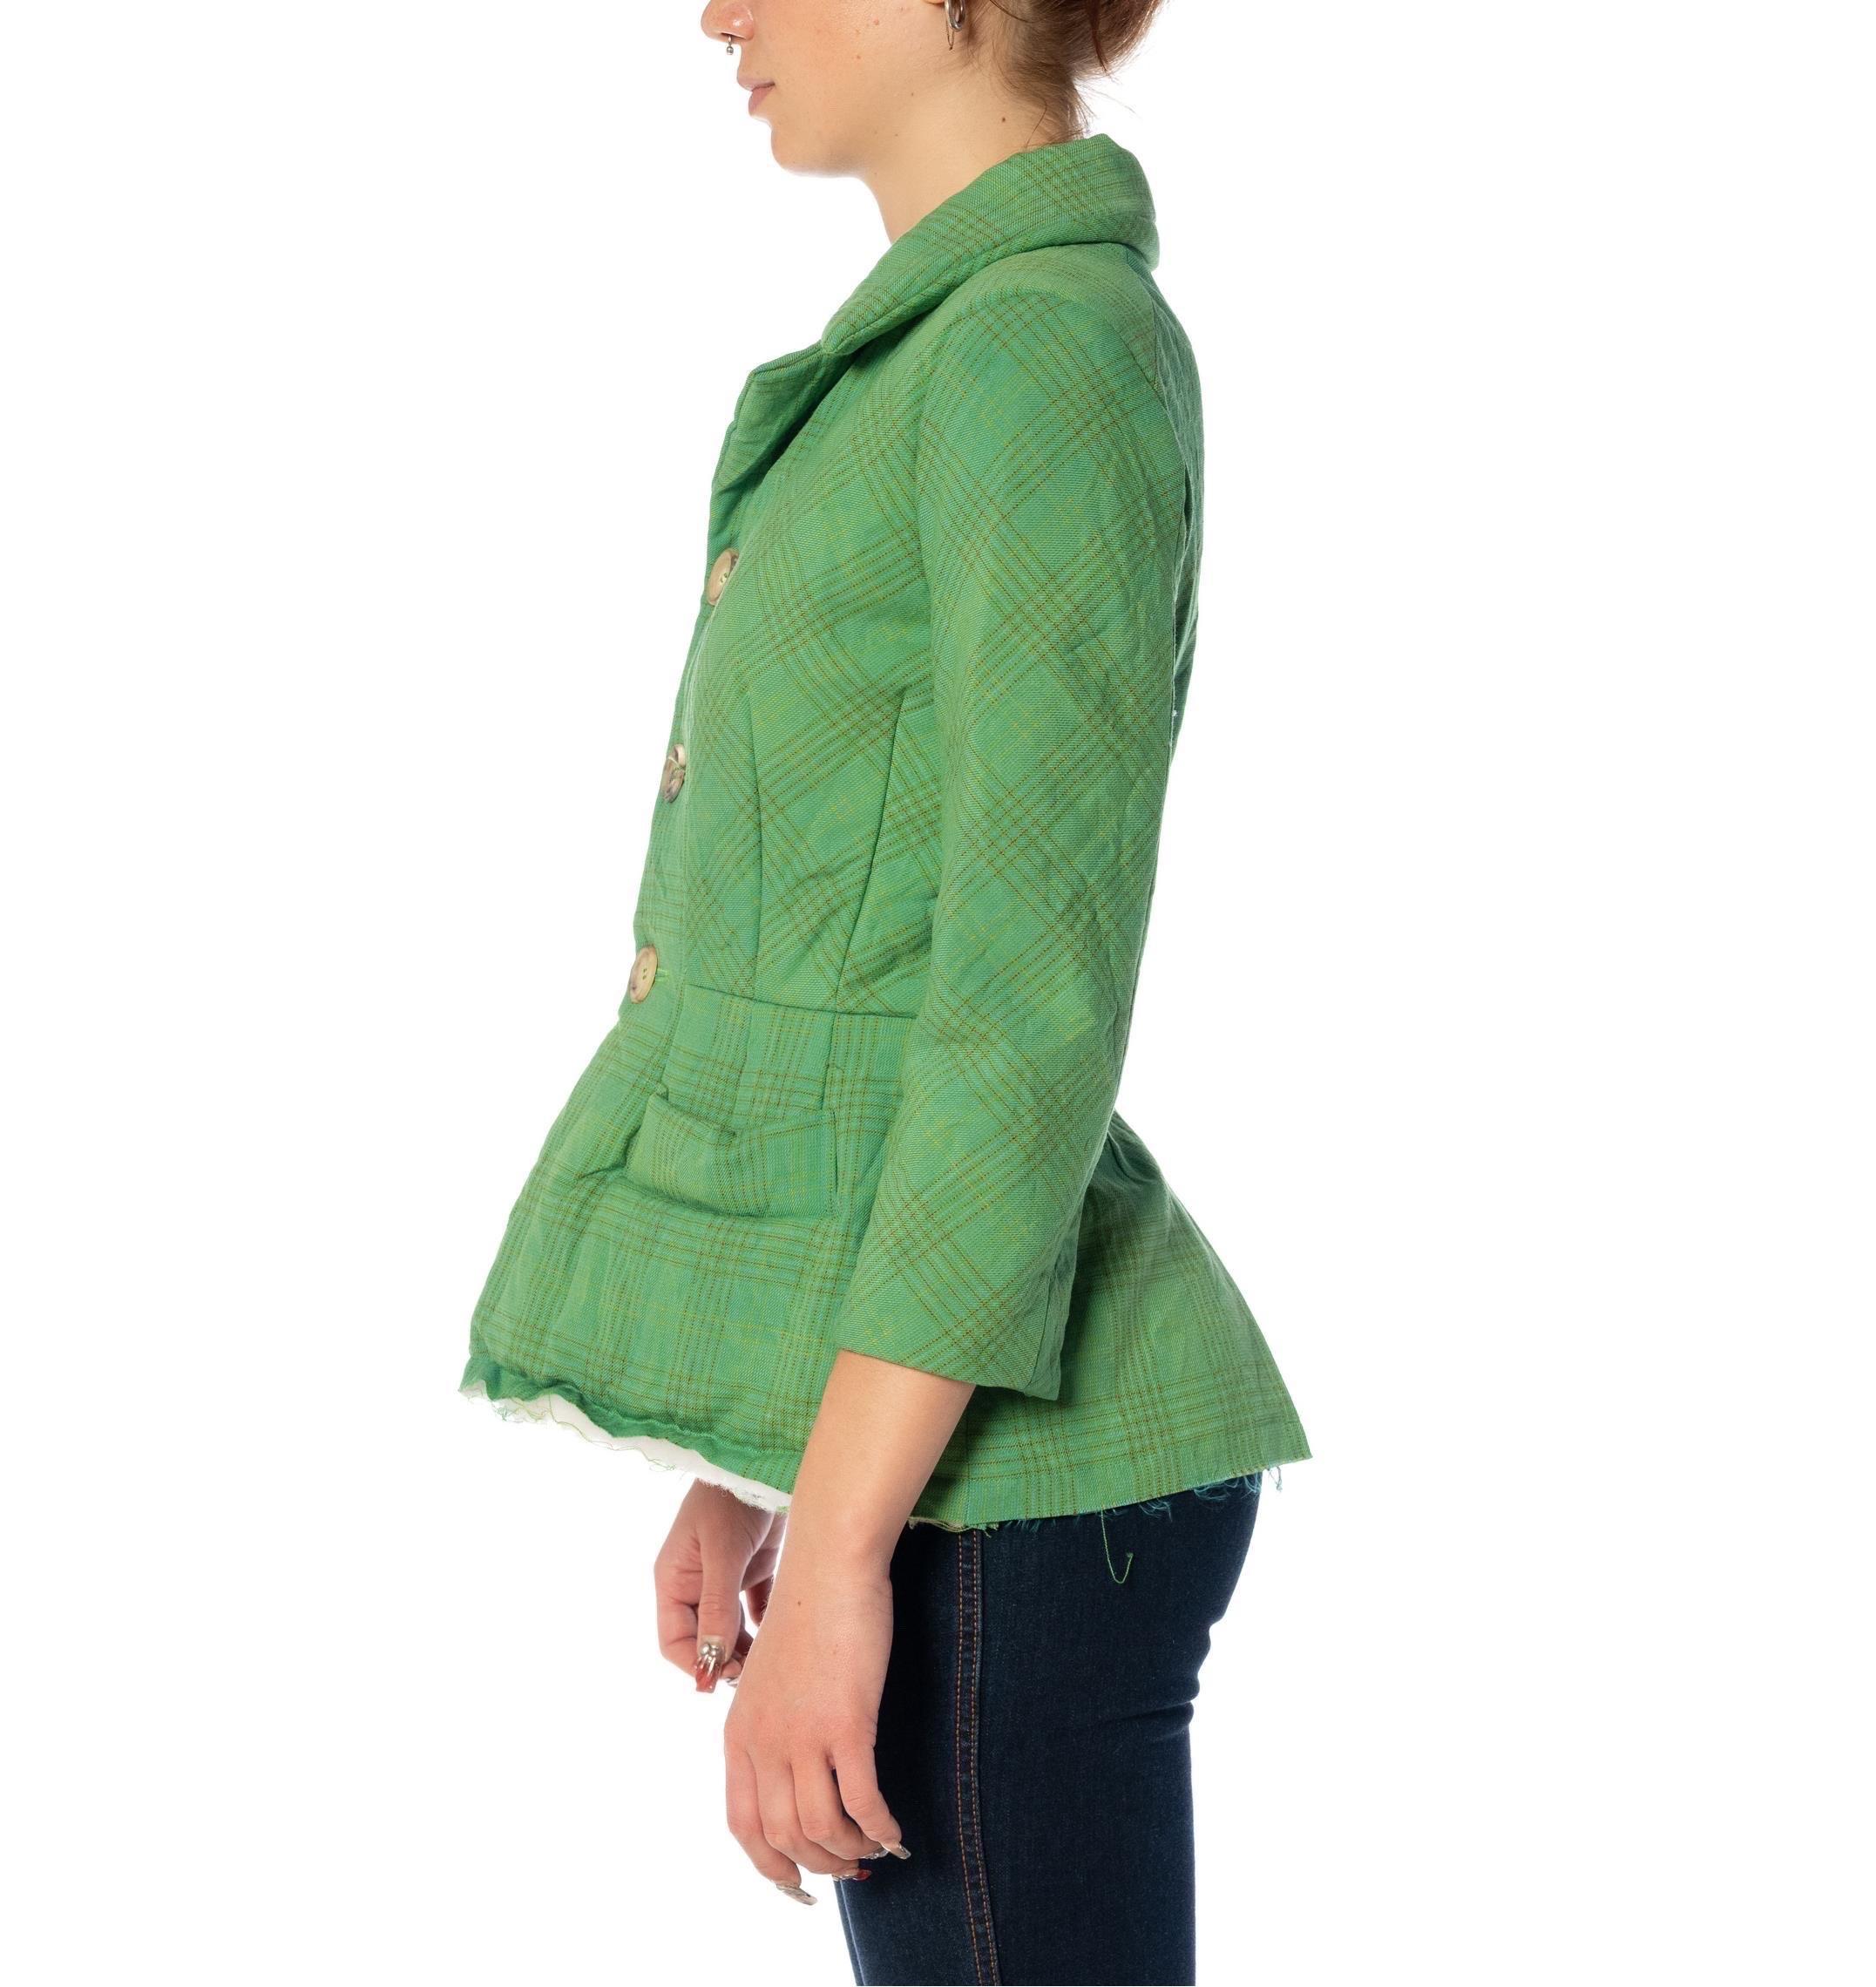 Women's 2000S JUNYA WATANABE COMME DES GARCONS Green Wrinkled Wool Jacket With Deconstr For Sale